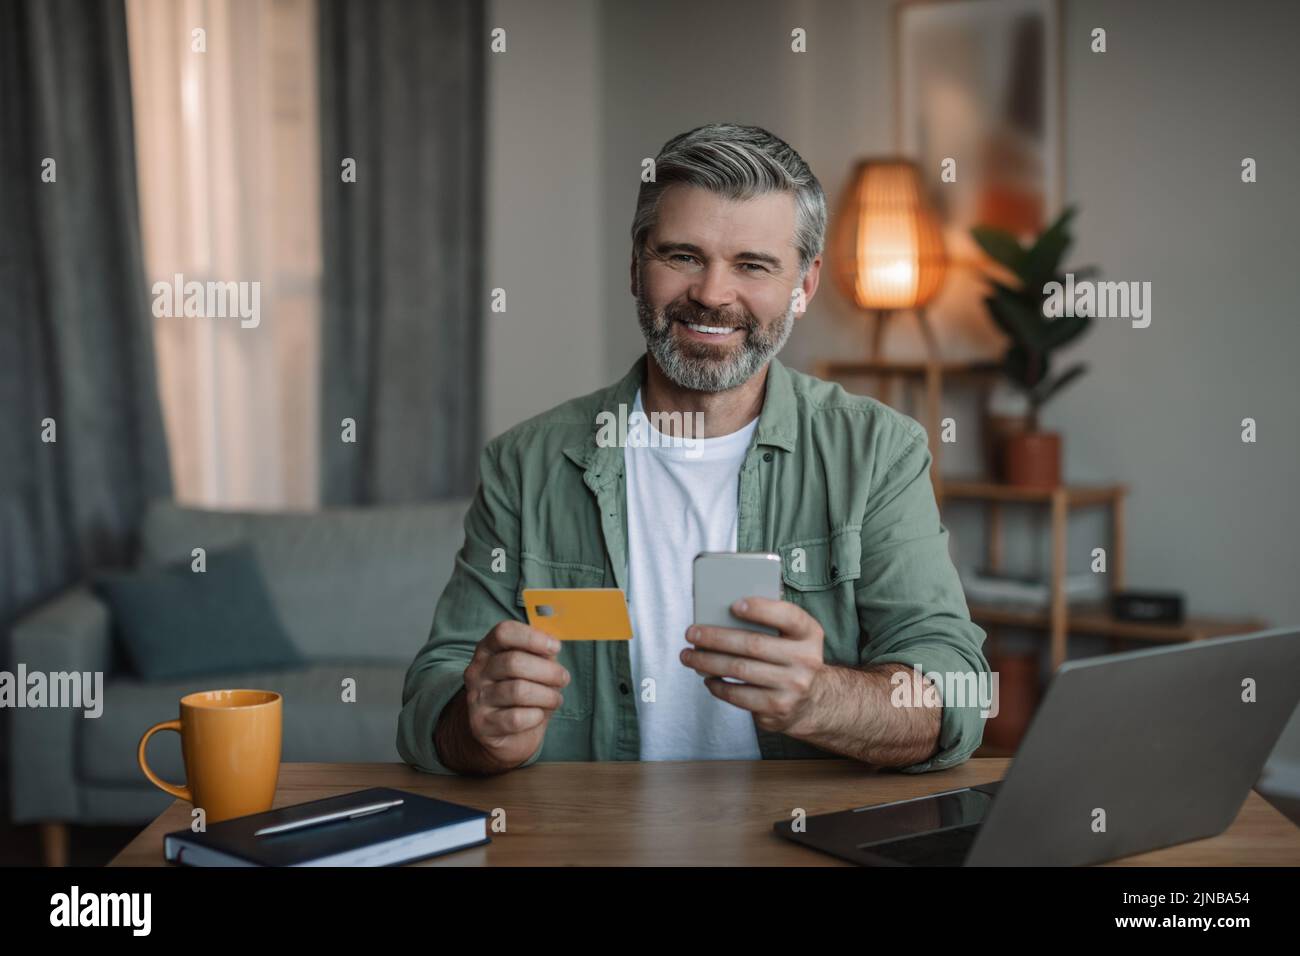 Buy and pay at home. Smiling retired european man with beard uses smartphone, computer and credit card Stock Photo